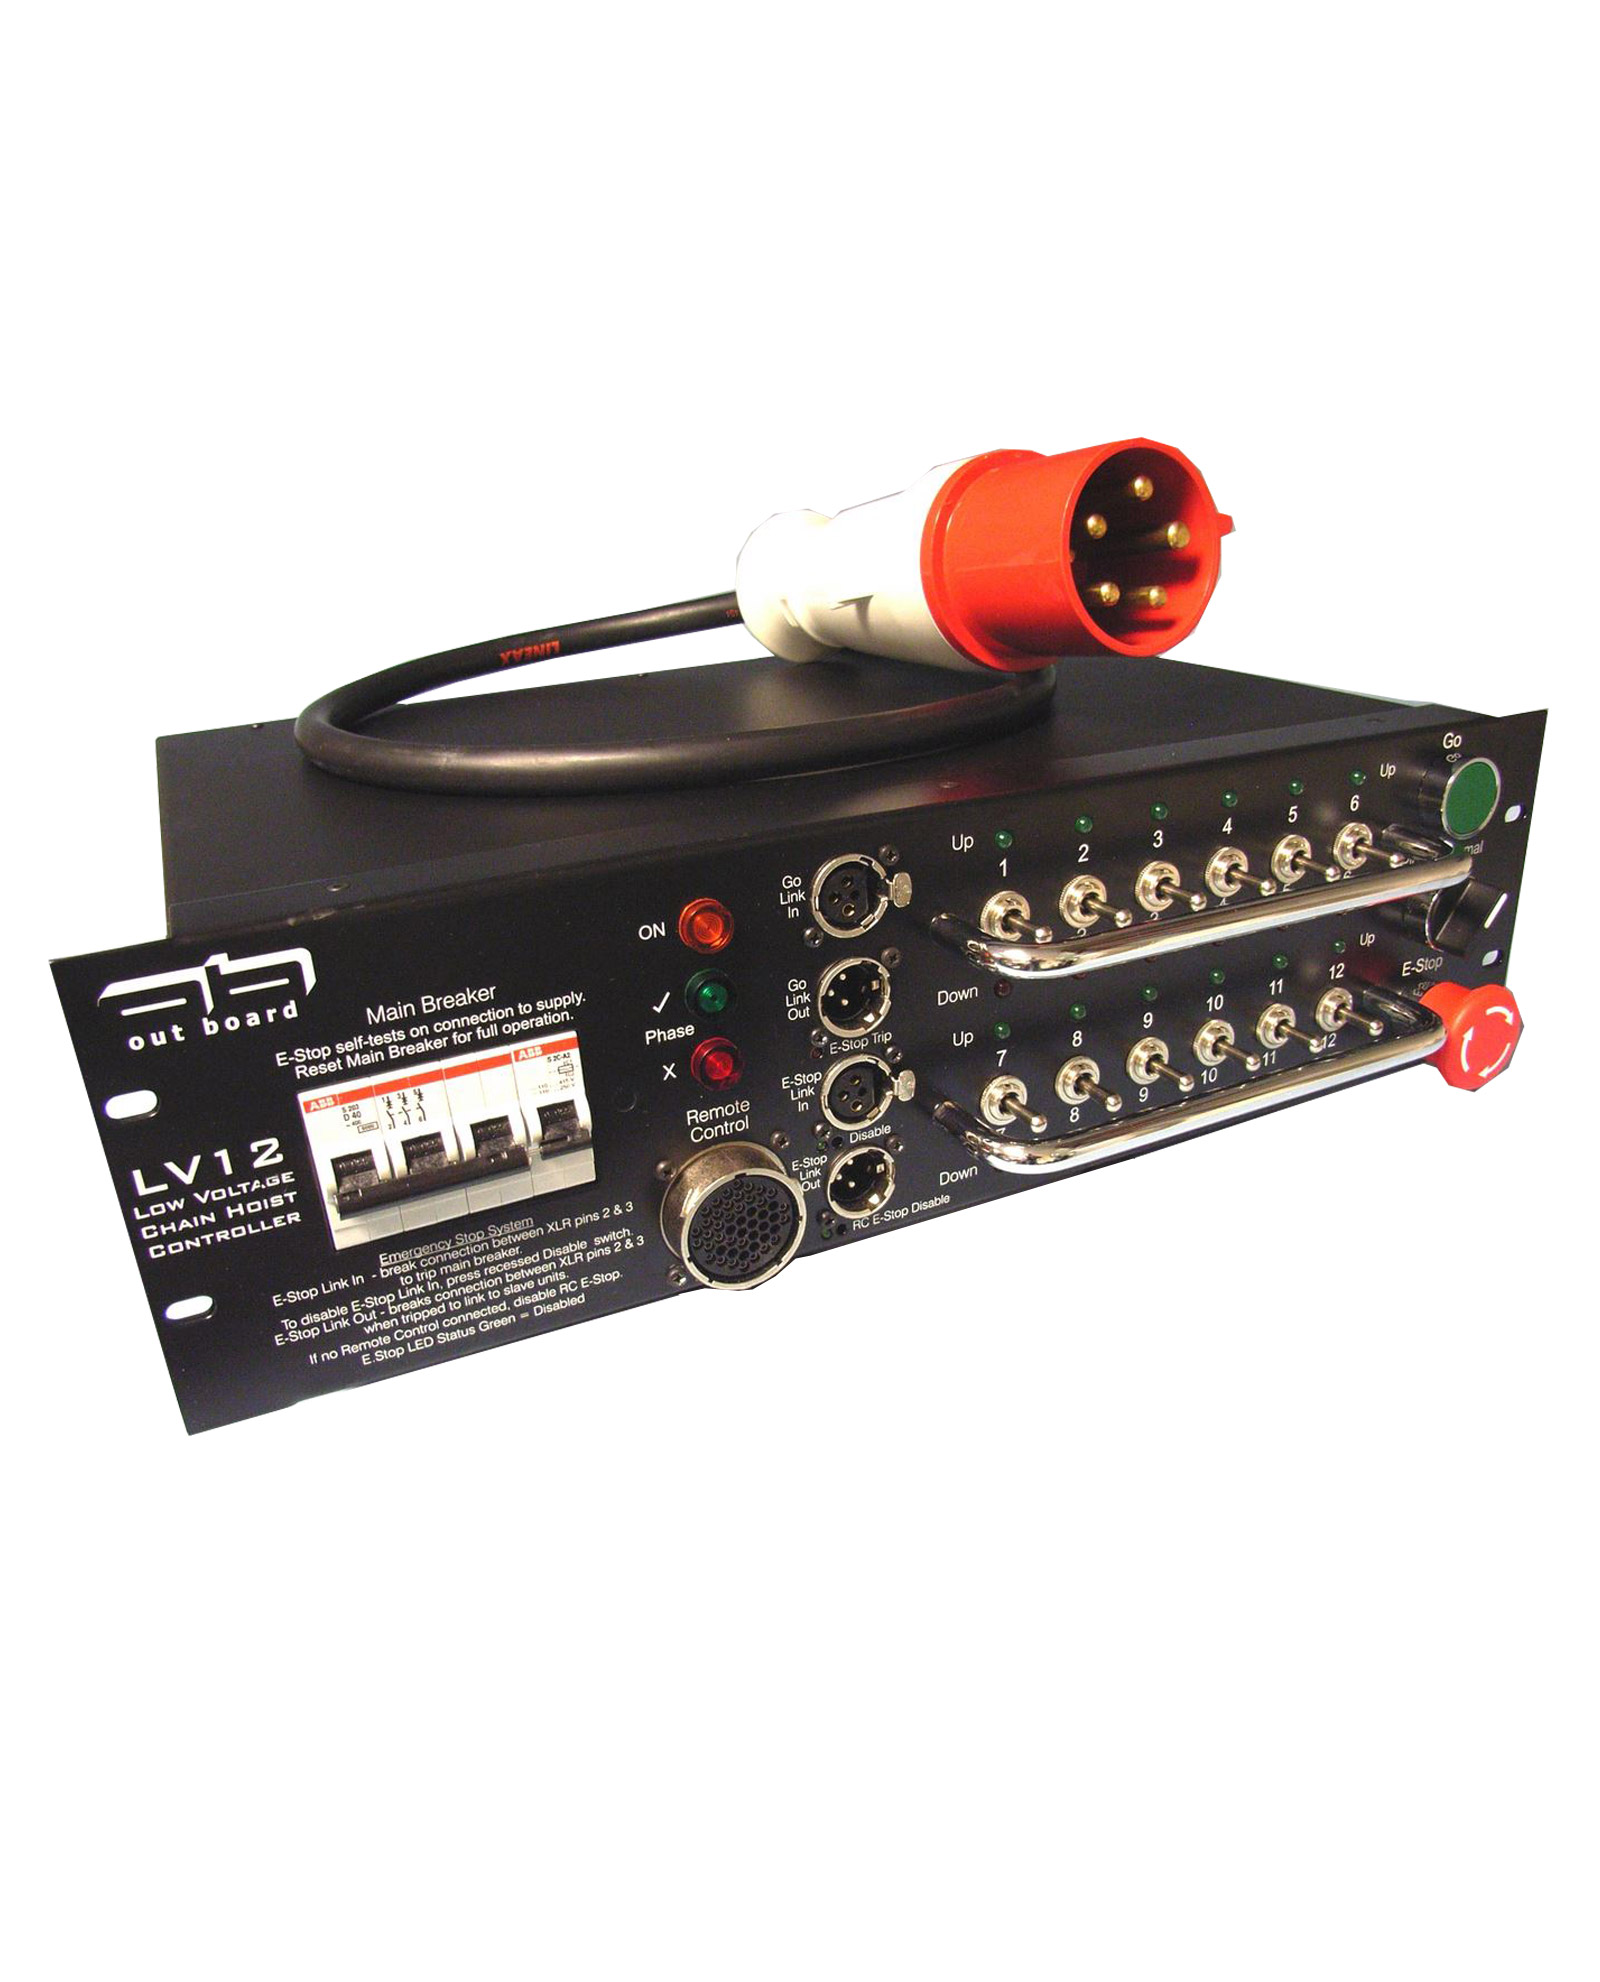 Outboard Lv12 Motor Controller Socapex Outlets